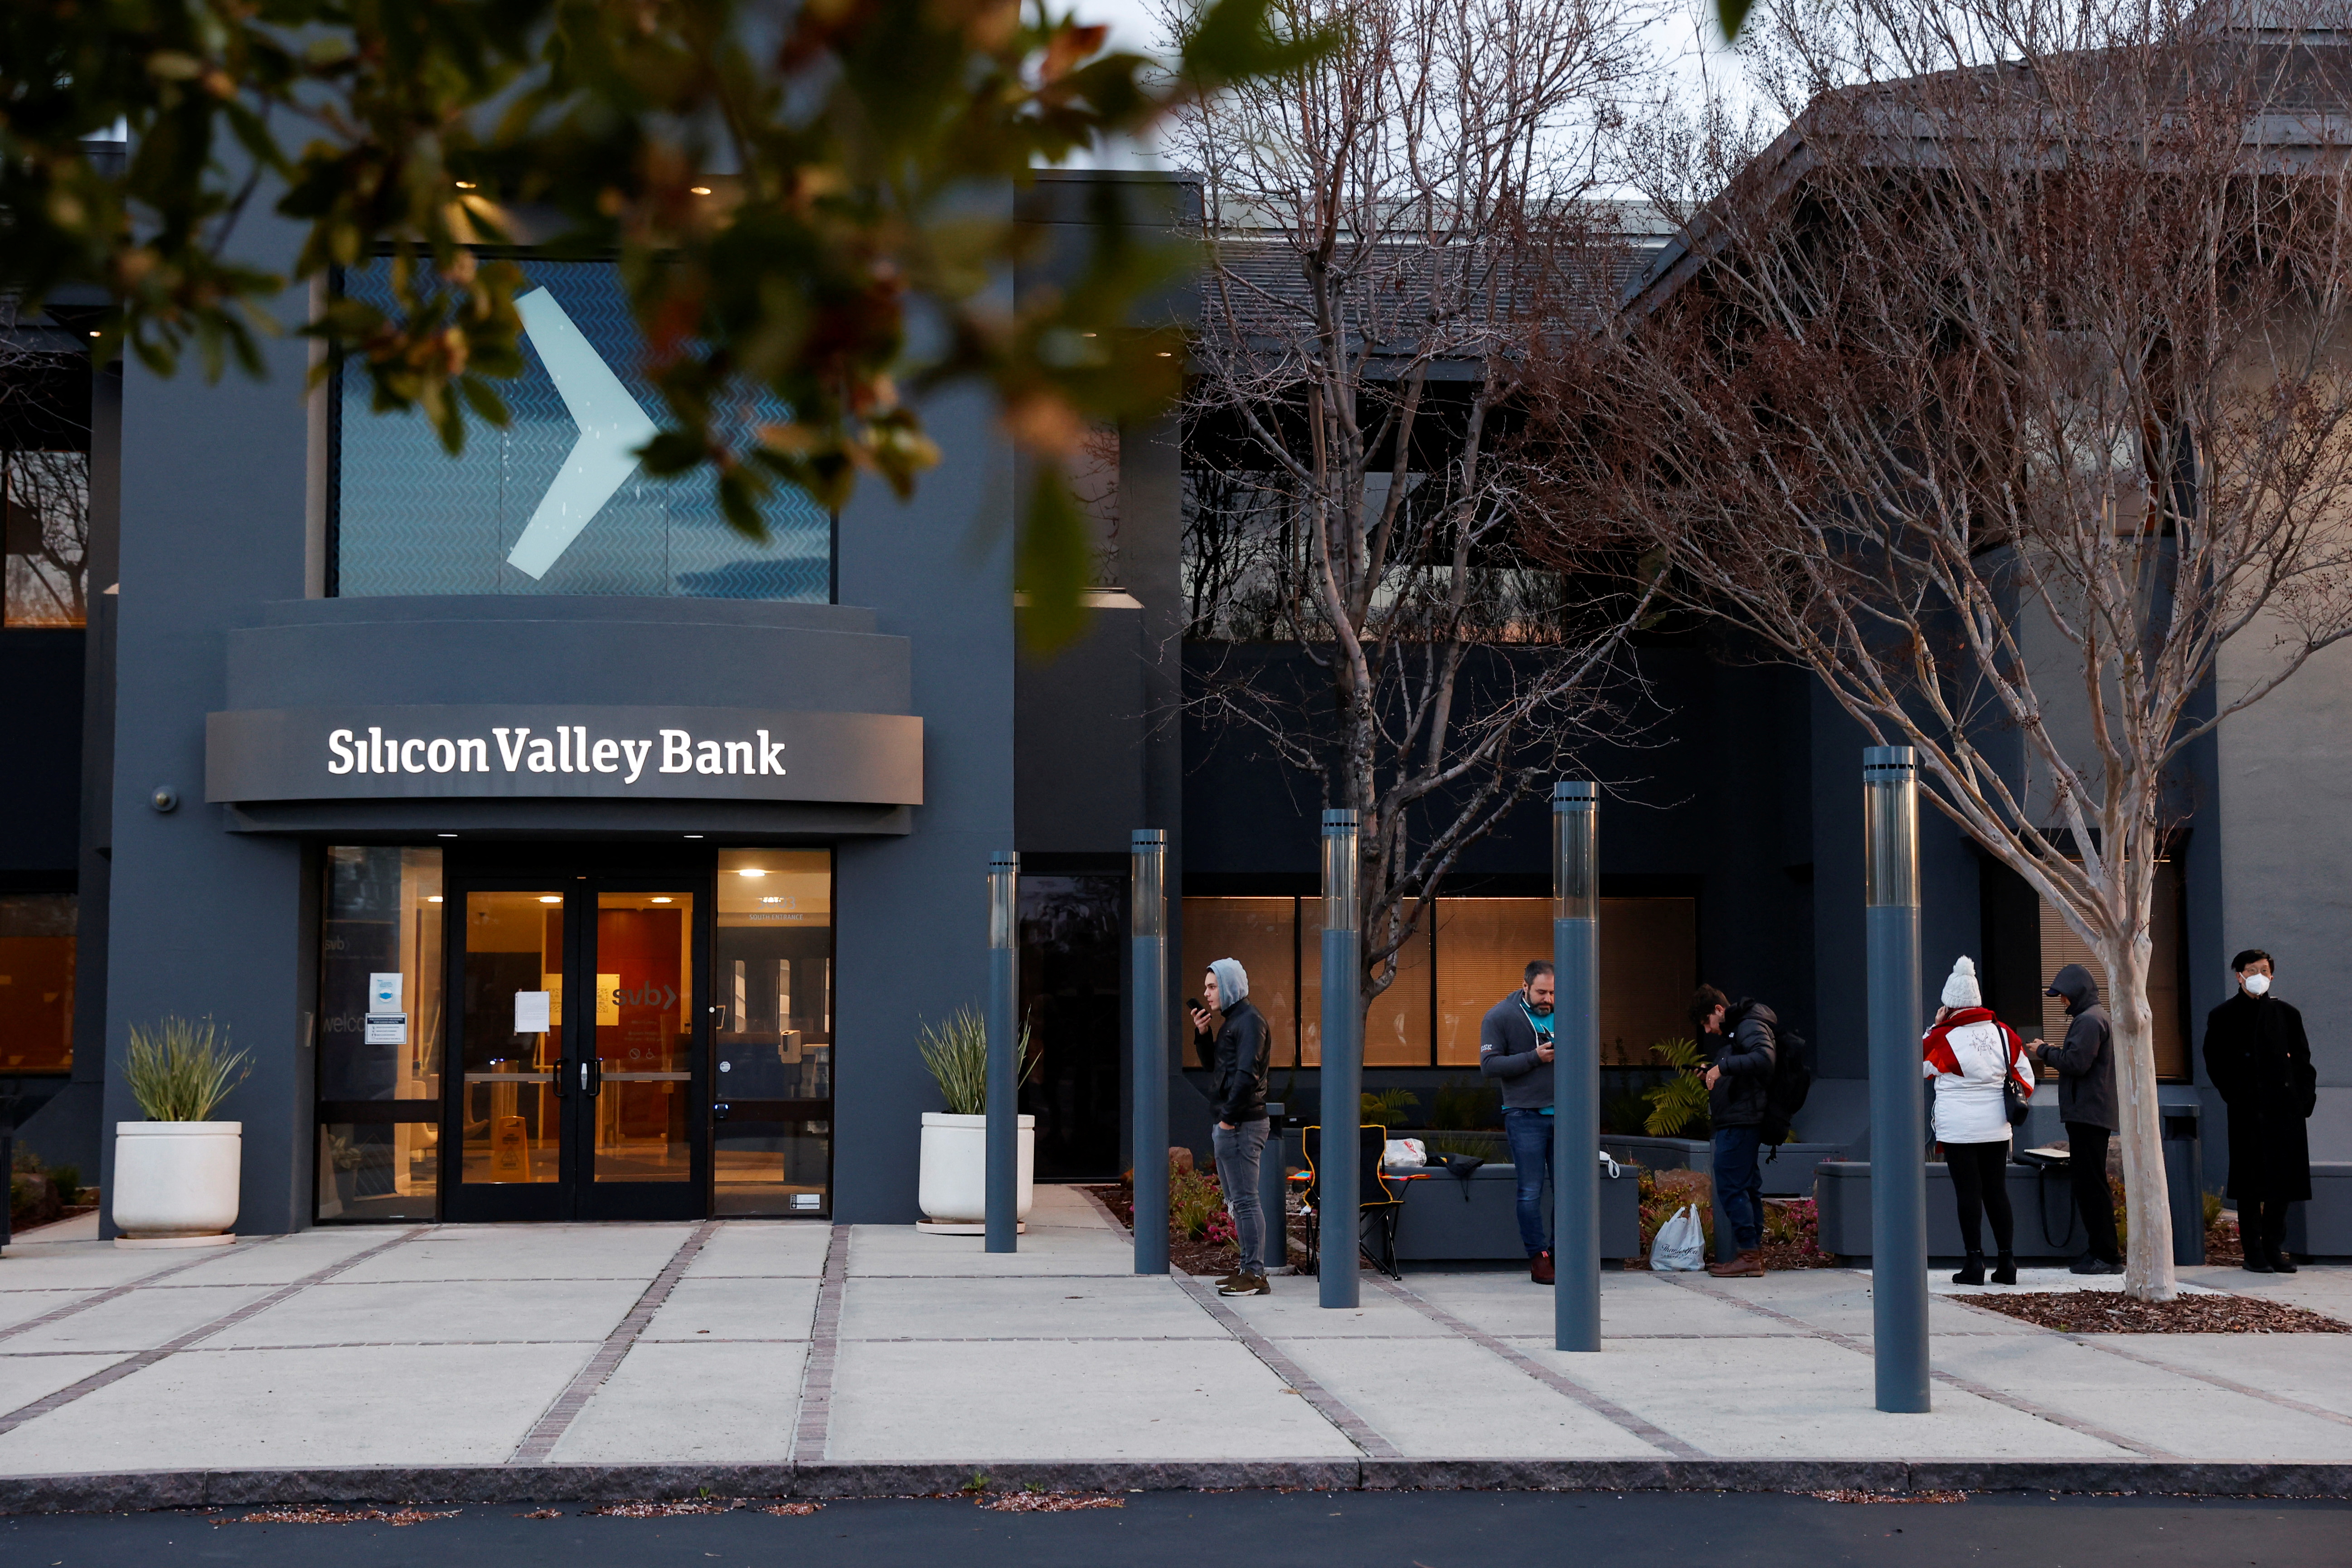 People line up outside the Silicon Valley Bank headquarters in Santa Clara, California, on March 13, 2023.